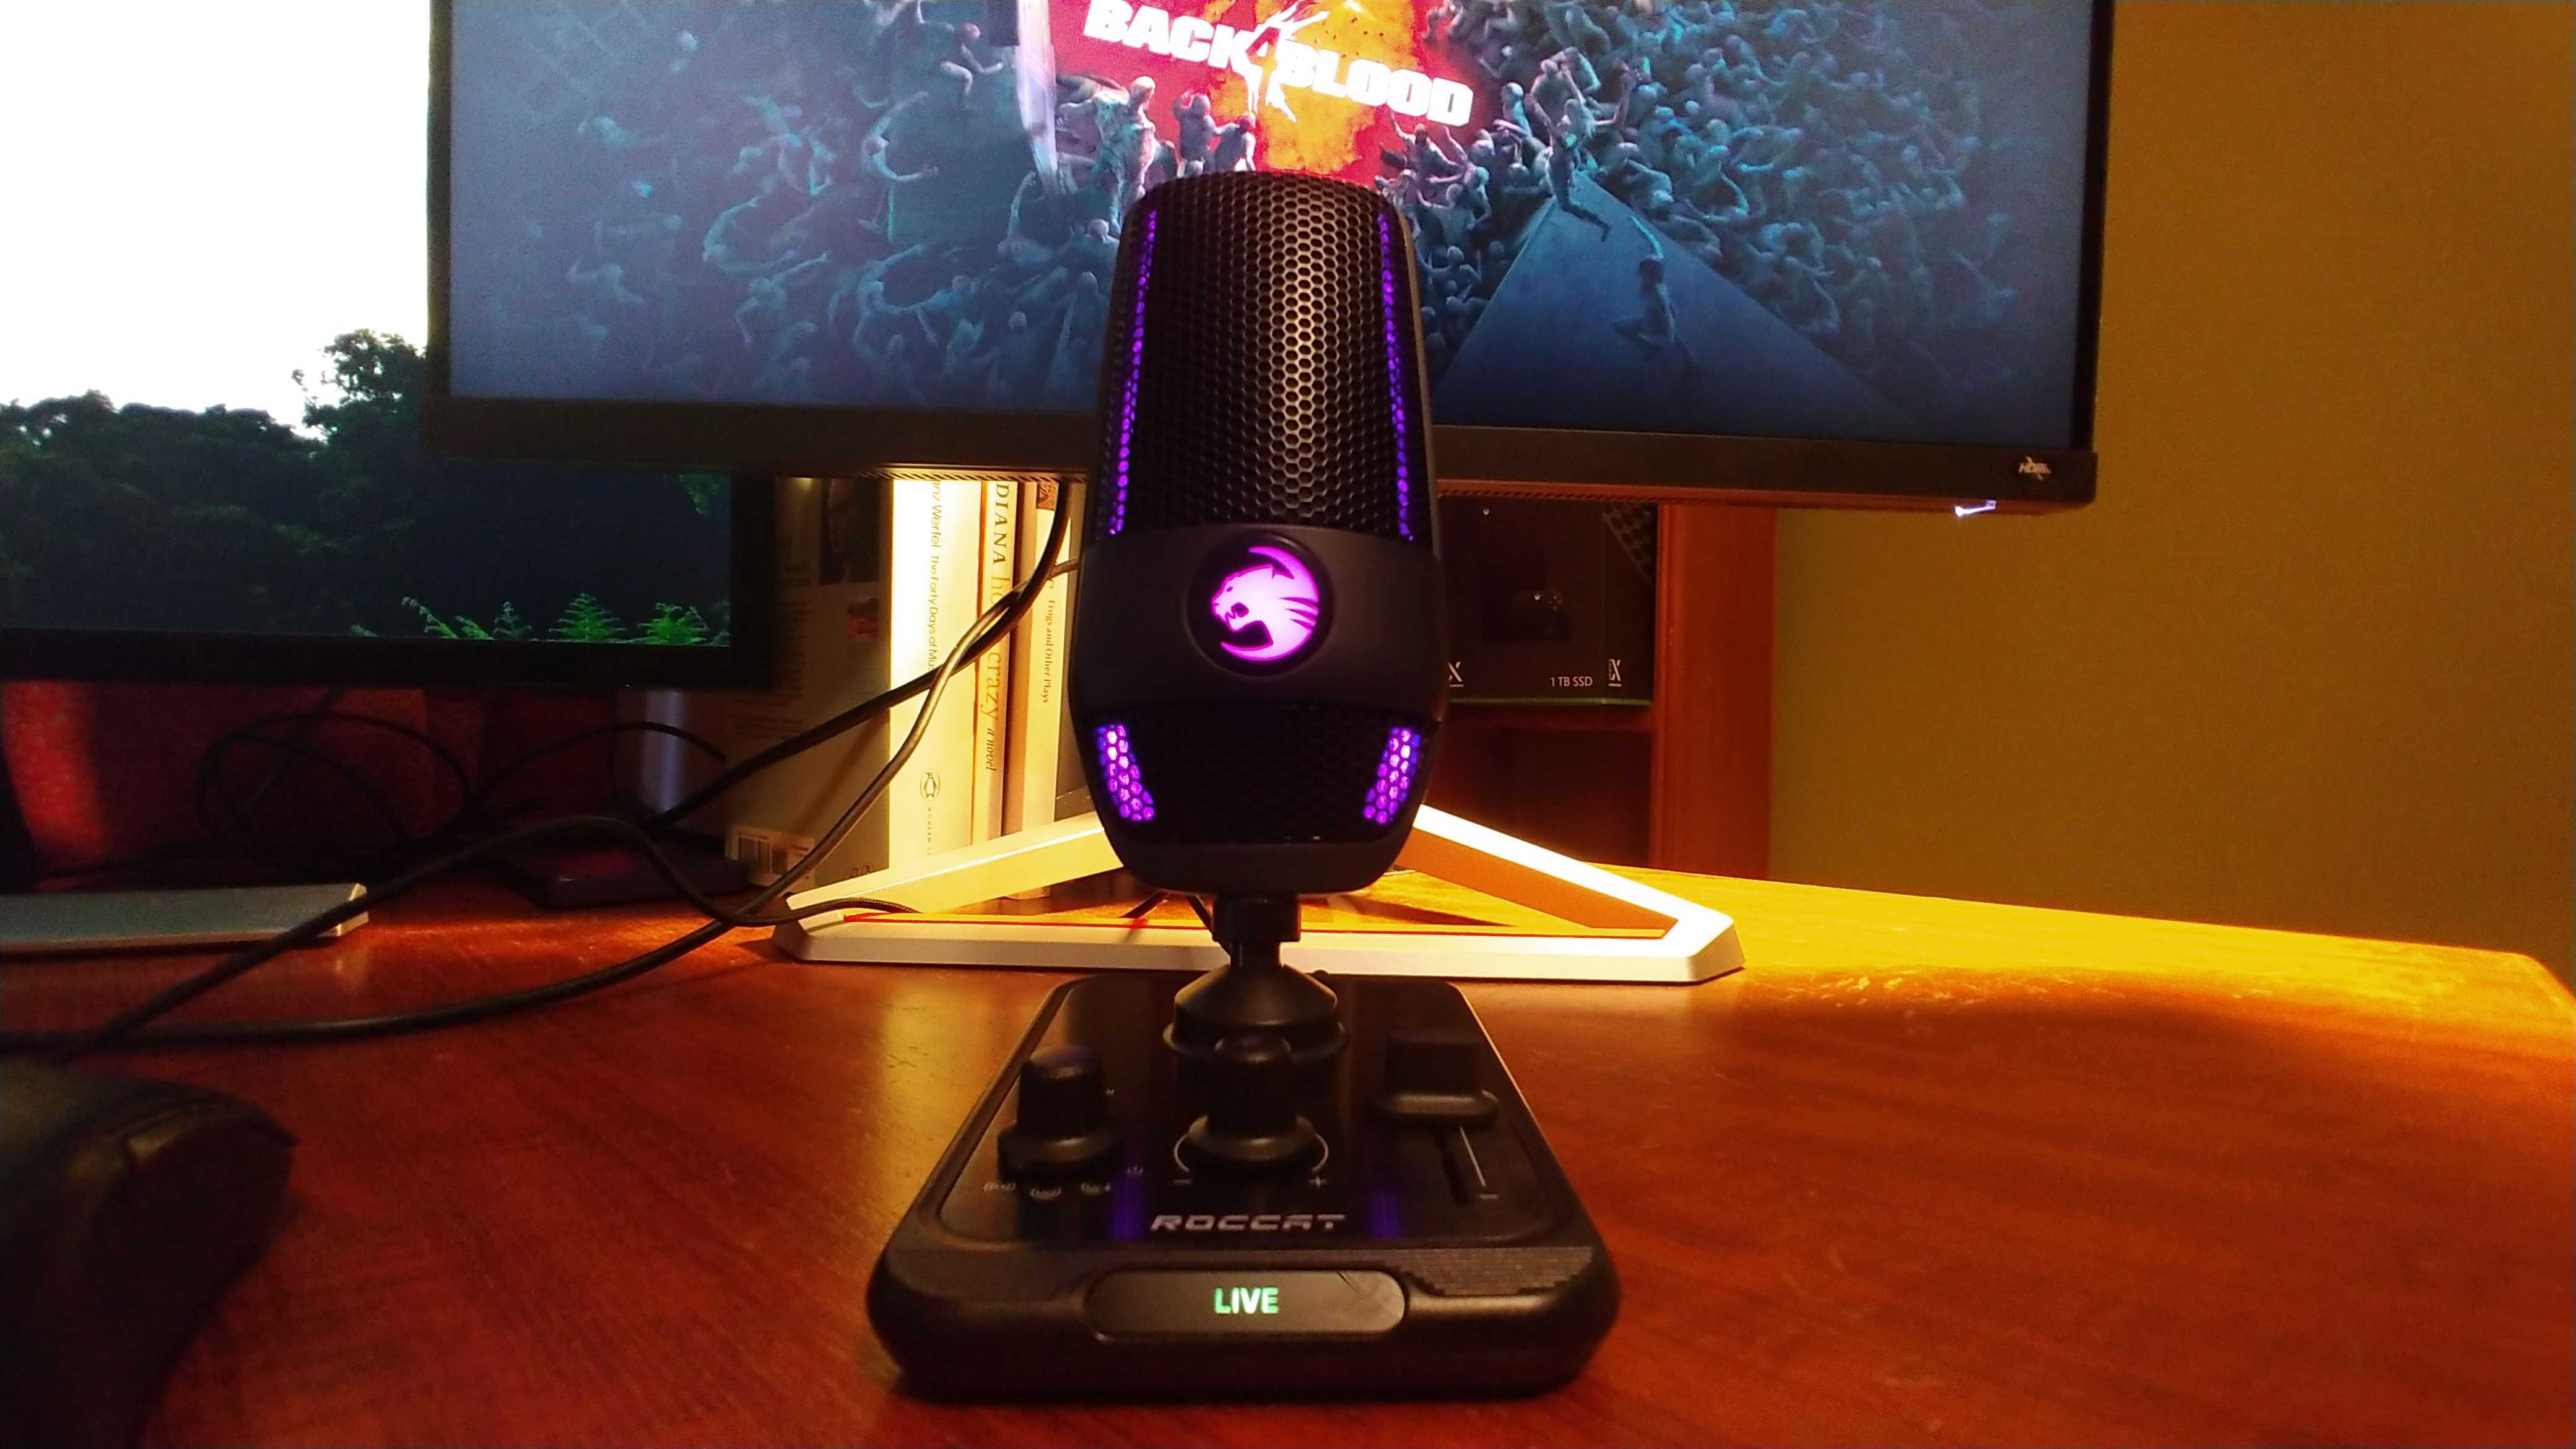  Roccat Torch microphone review  